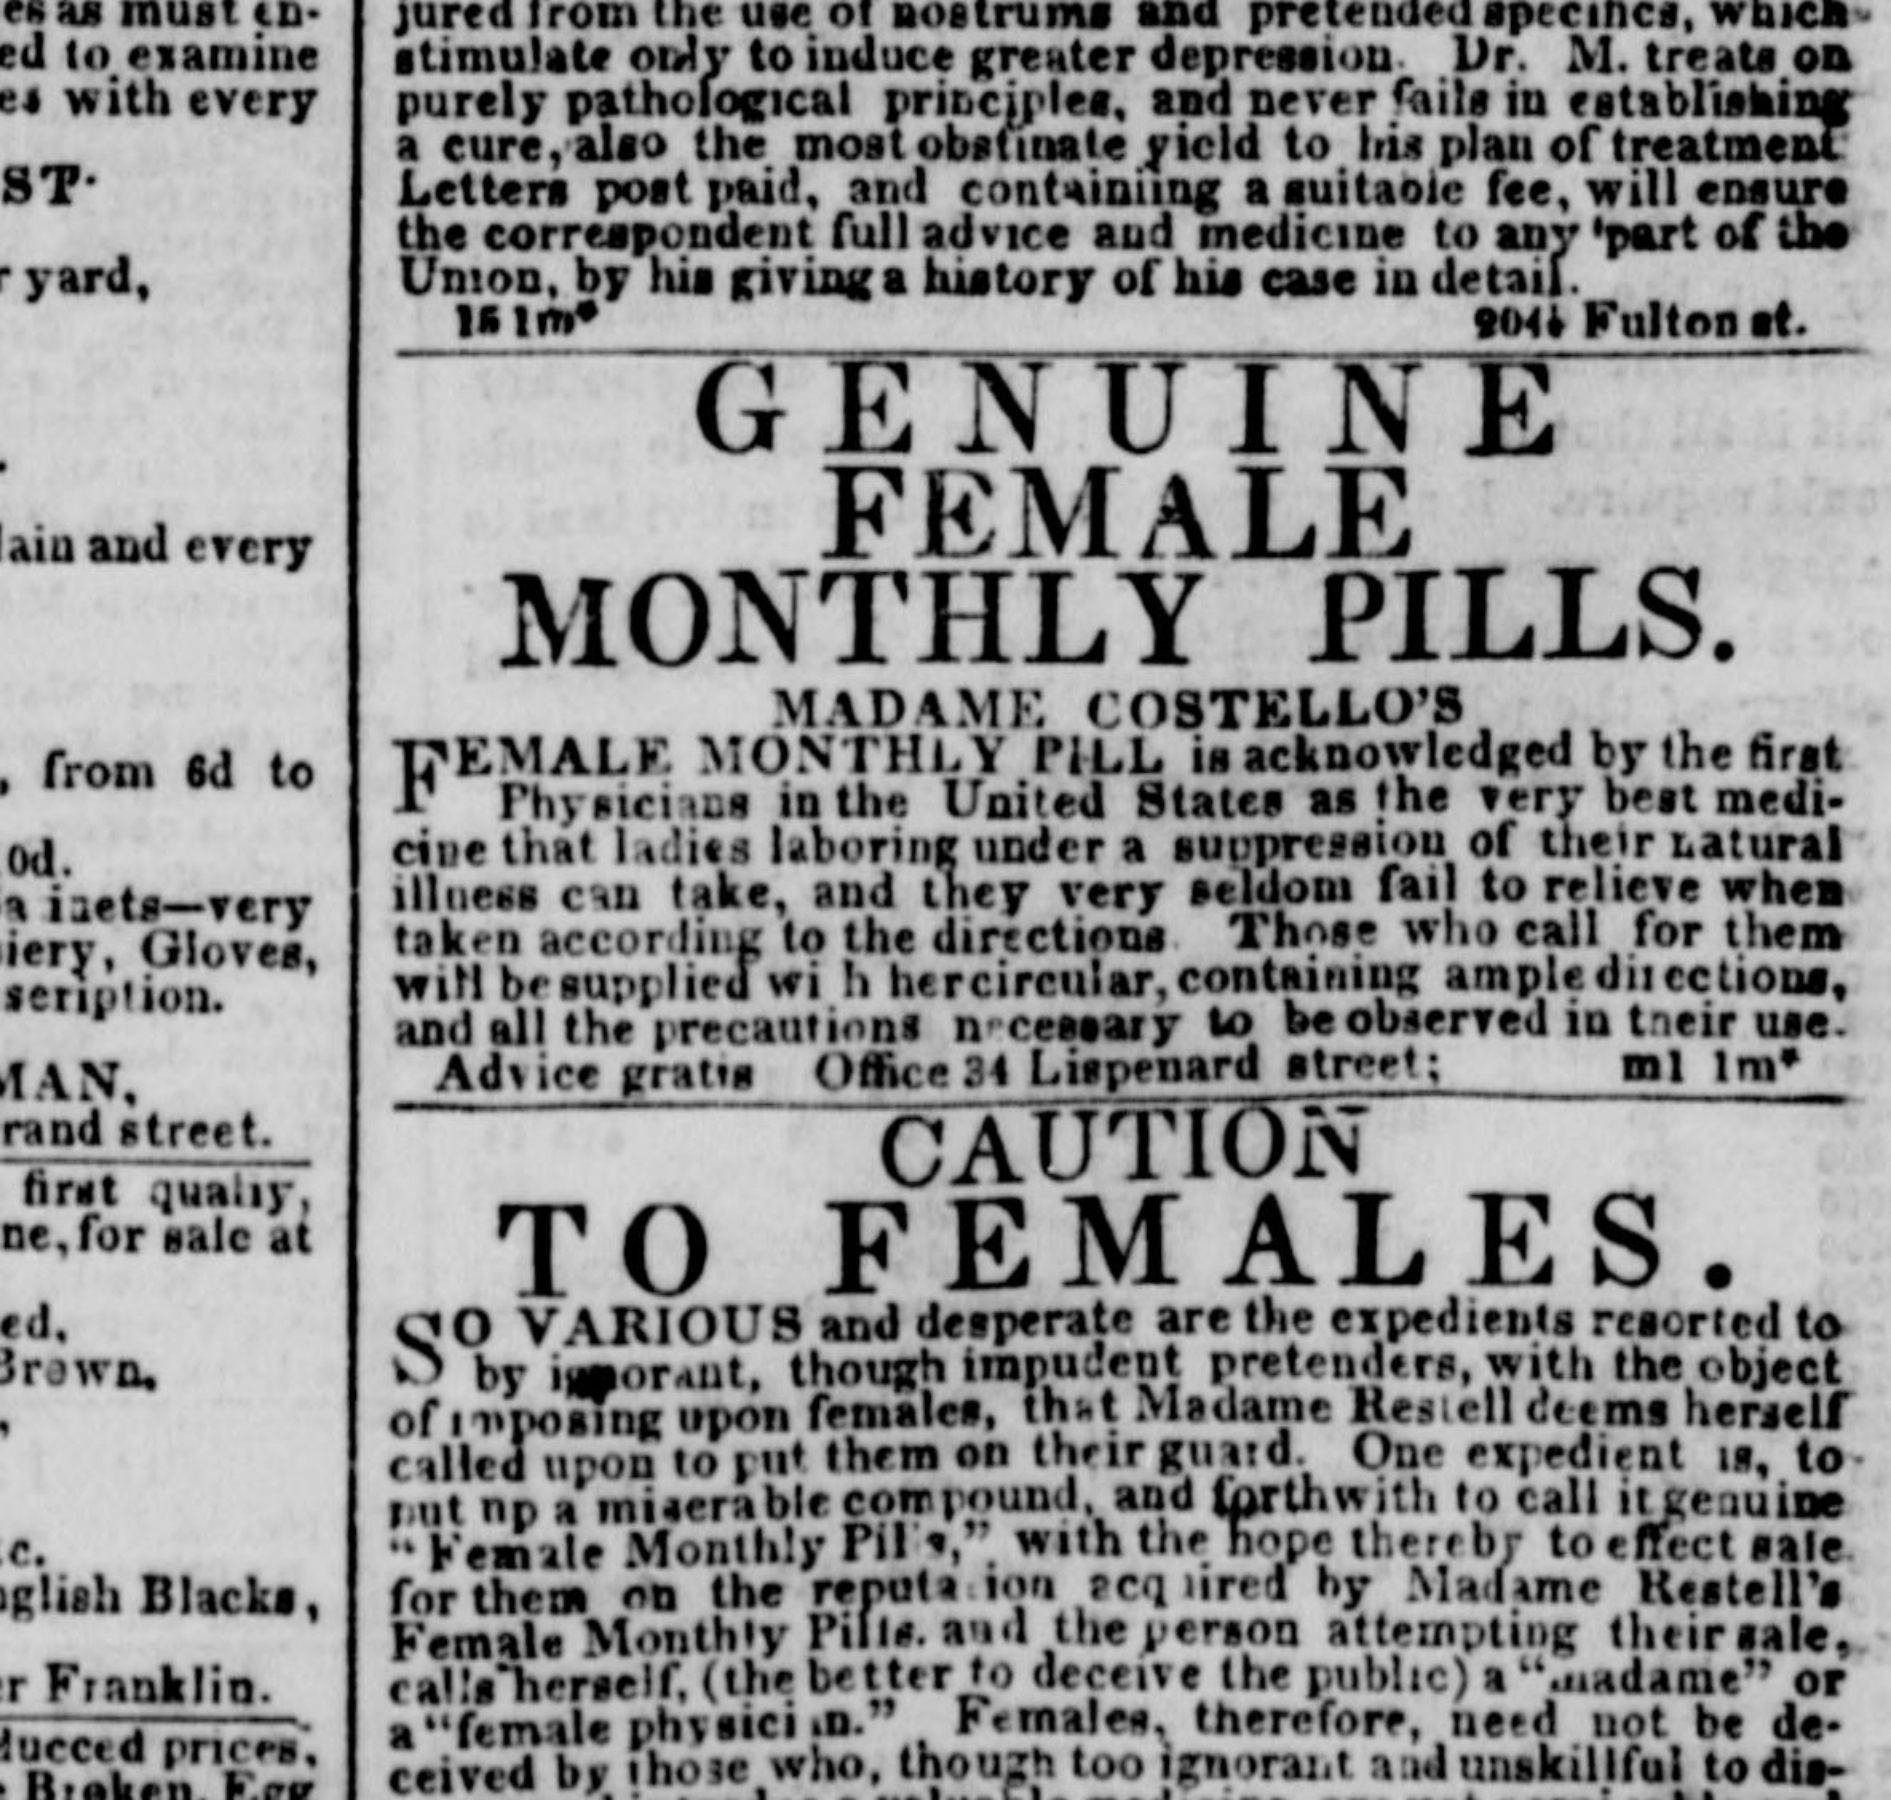 Nineteenth-century newspaper advertisements for birth control and abortifacients used euphemisms. This one from 1847 offers pills of 